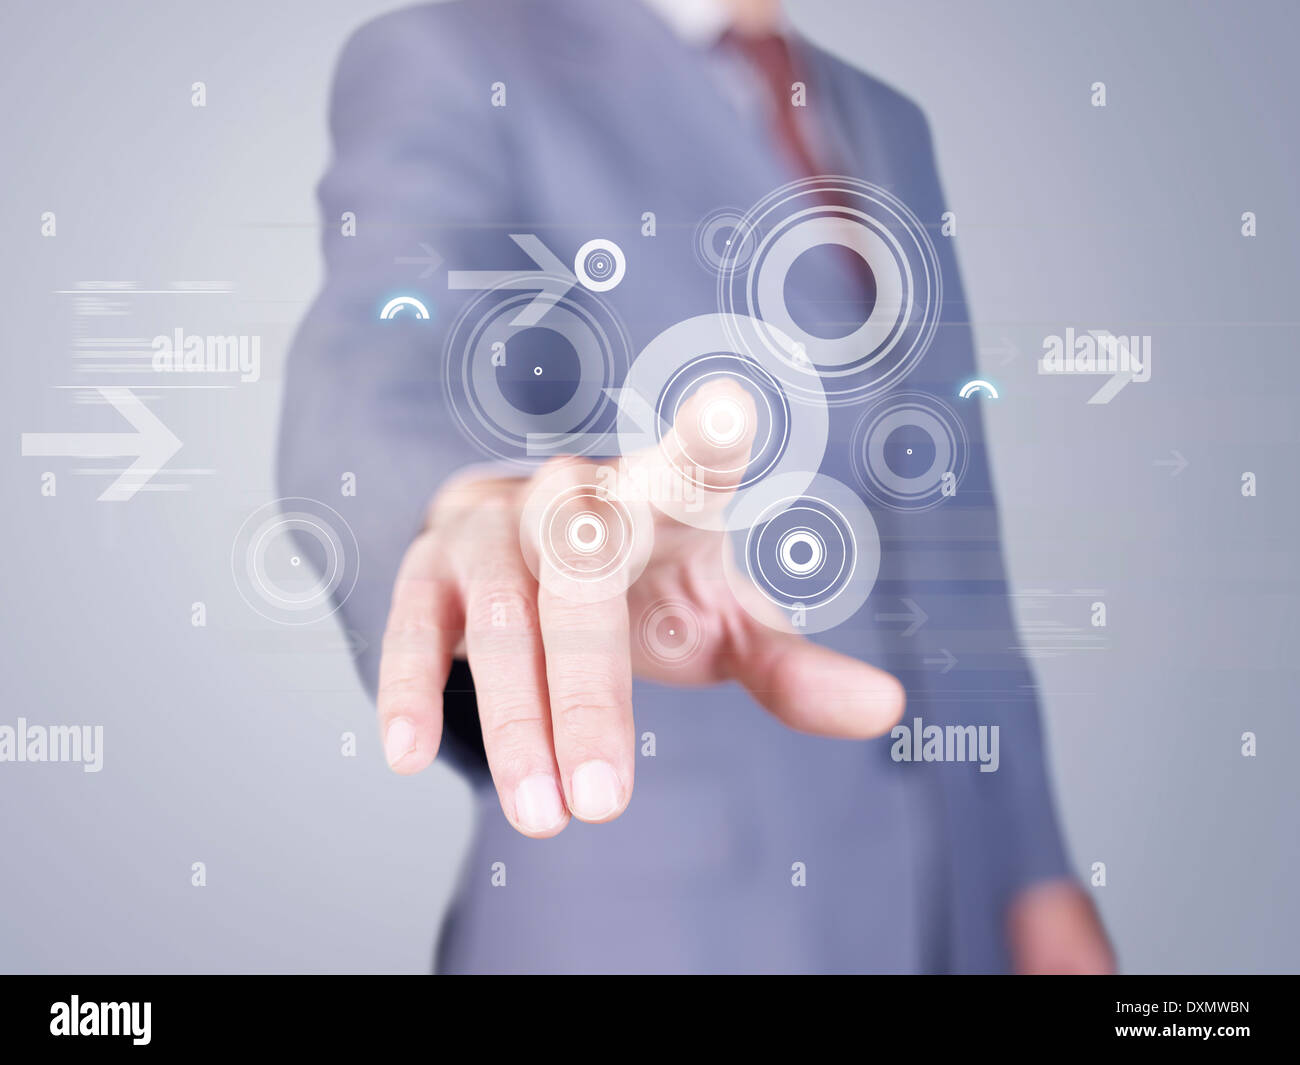 finger pressing virtual buttons Stock Photo